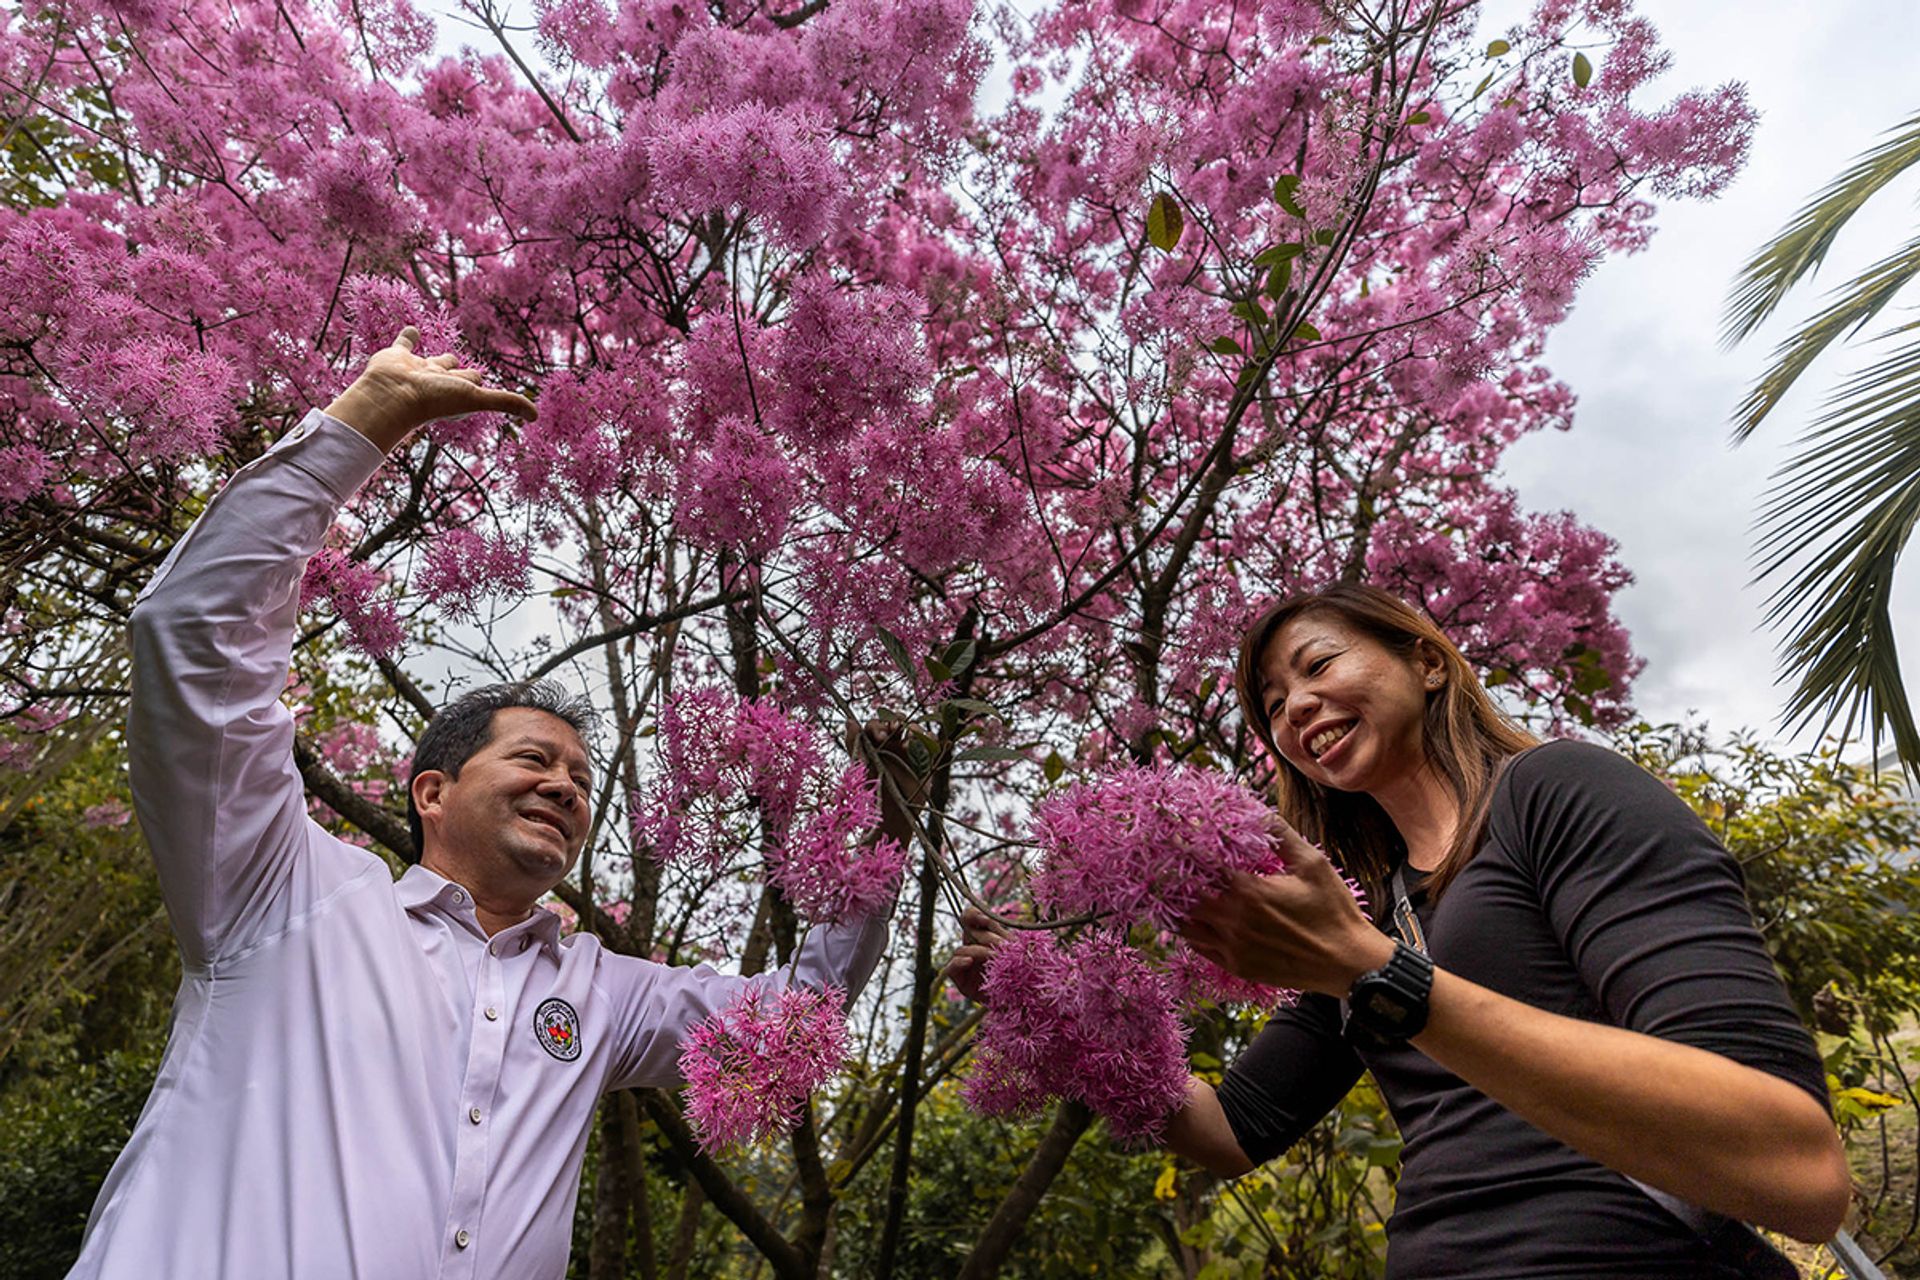 Mr Portilla and Ms Xue admire the pink flowers of a Chionanthus pubescens tree.